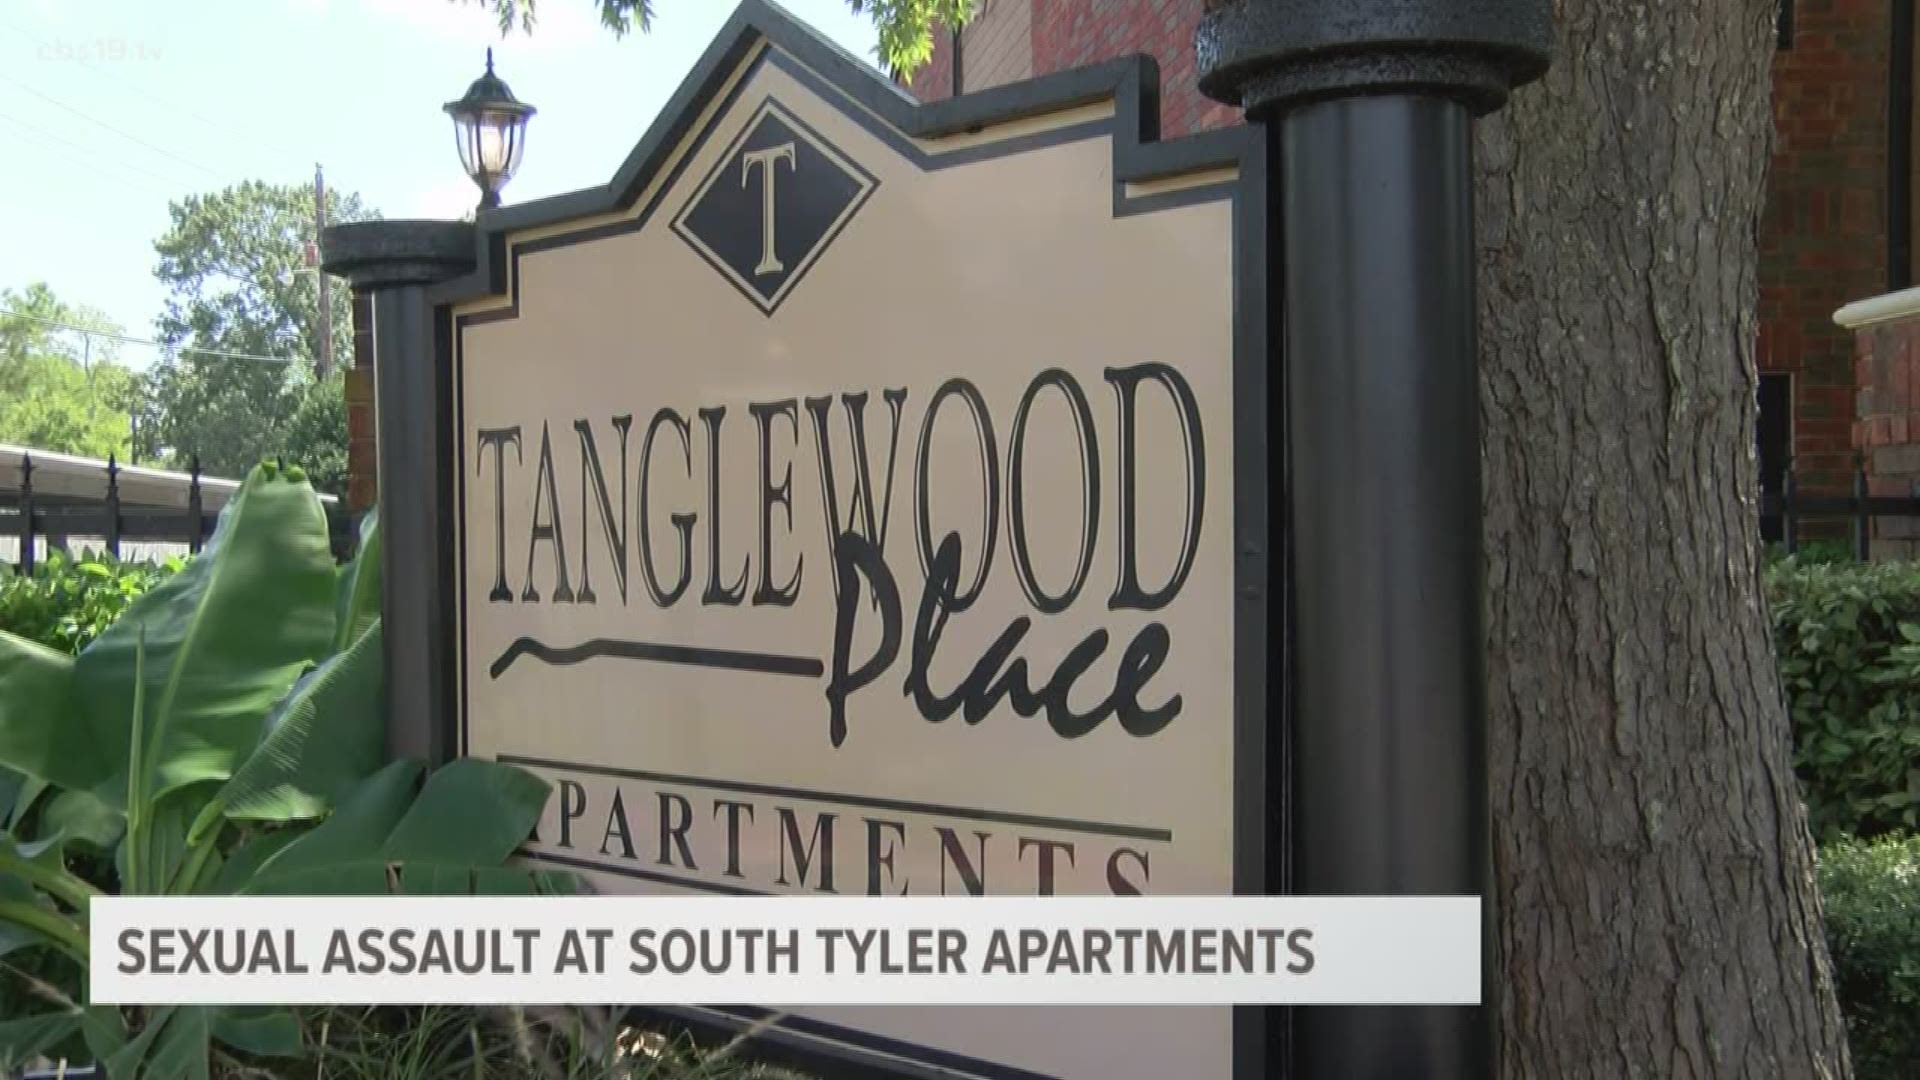 Police say a young black male with a thing build and all black clothing sexually assaulted and robbed a middle aged woman at gunpoint in her Tanglewood Place apartment.